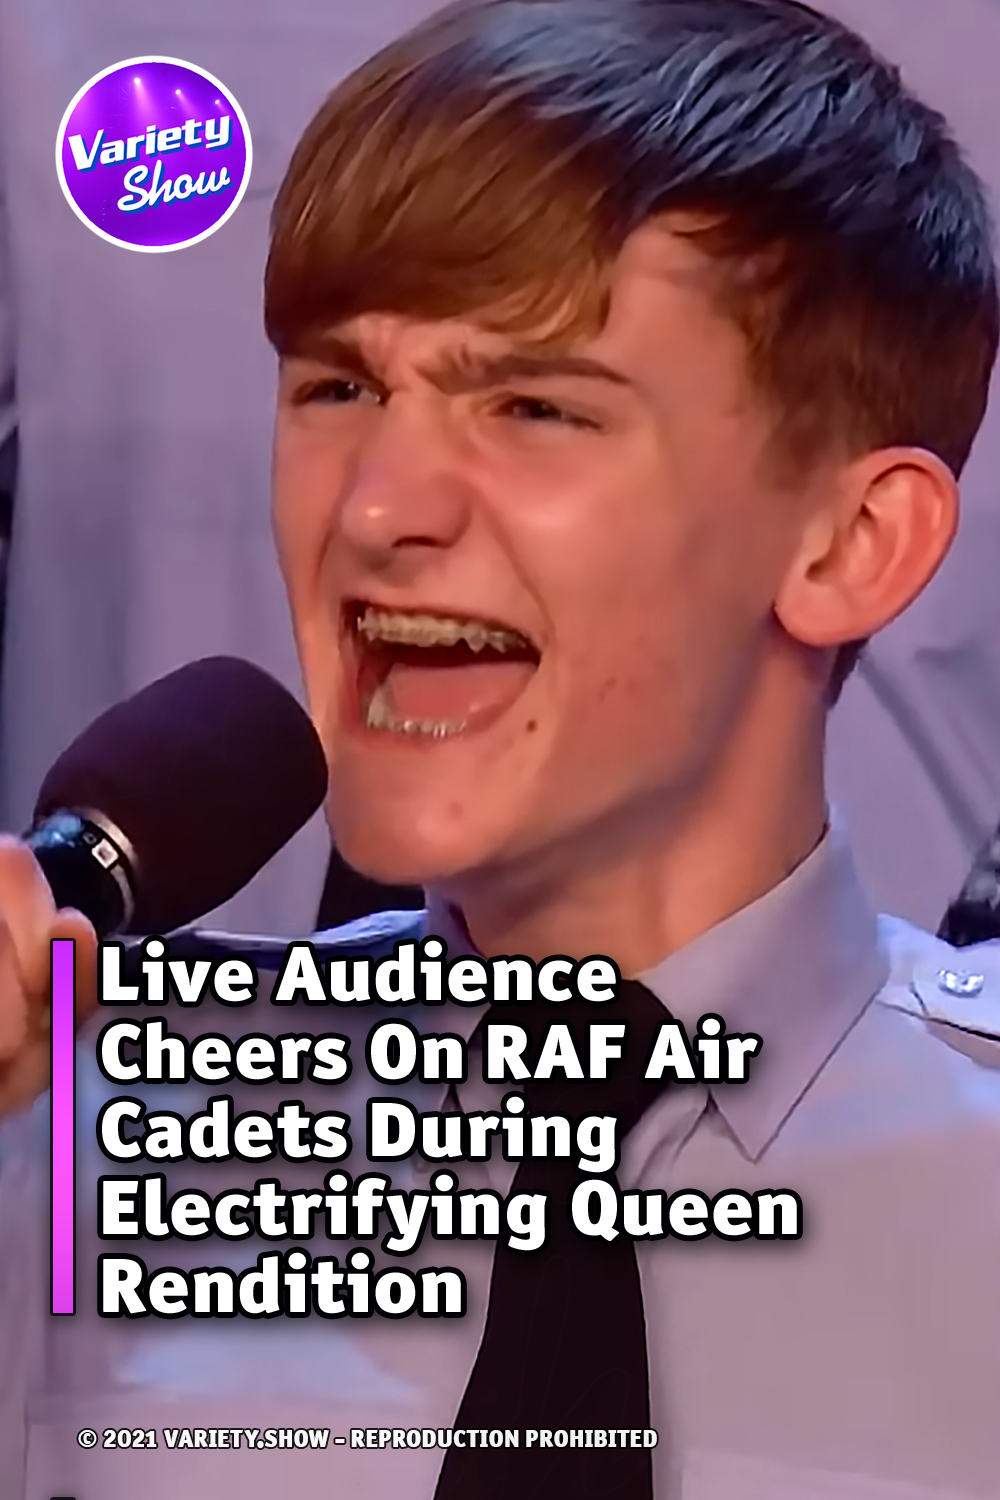 Live Audience Cheers On RAF Air Cadets During Electrifying Queen Rendition